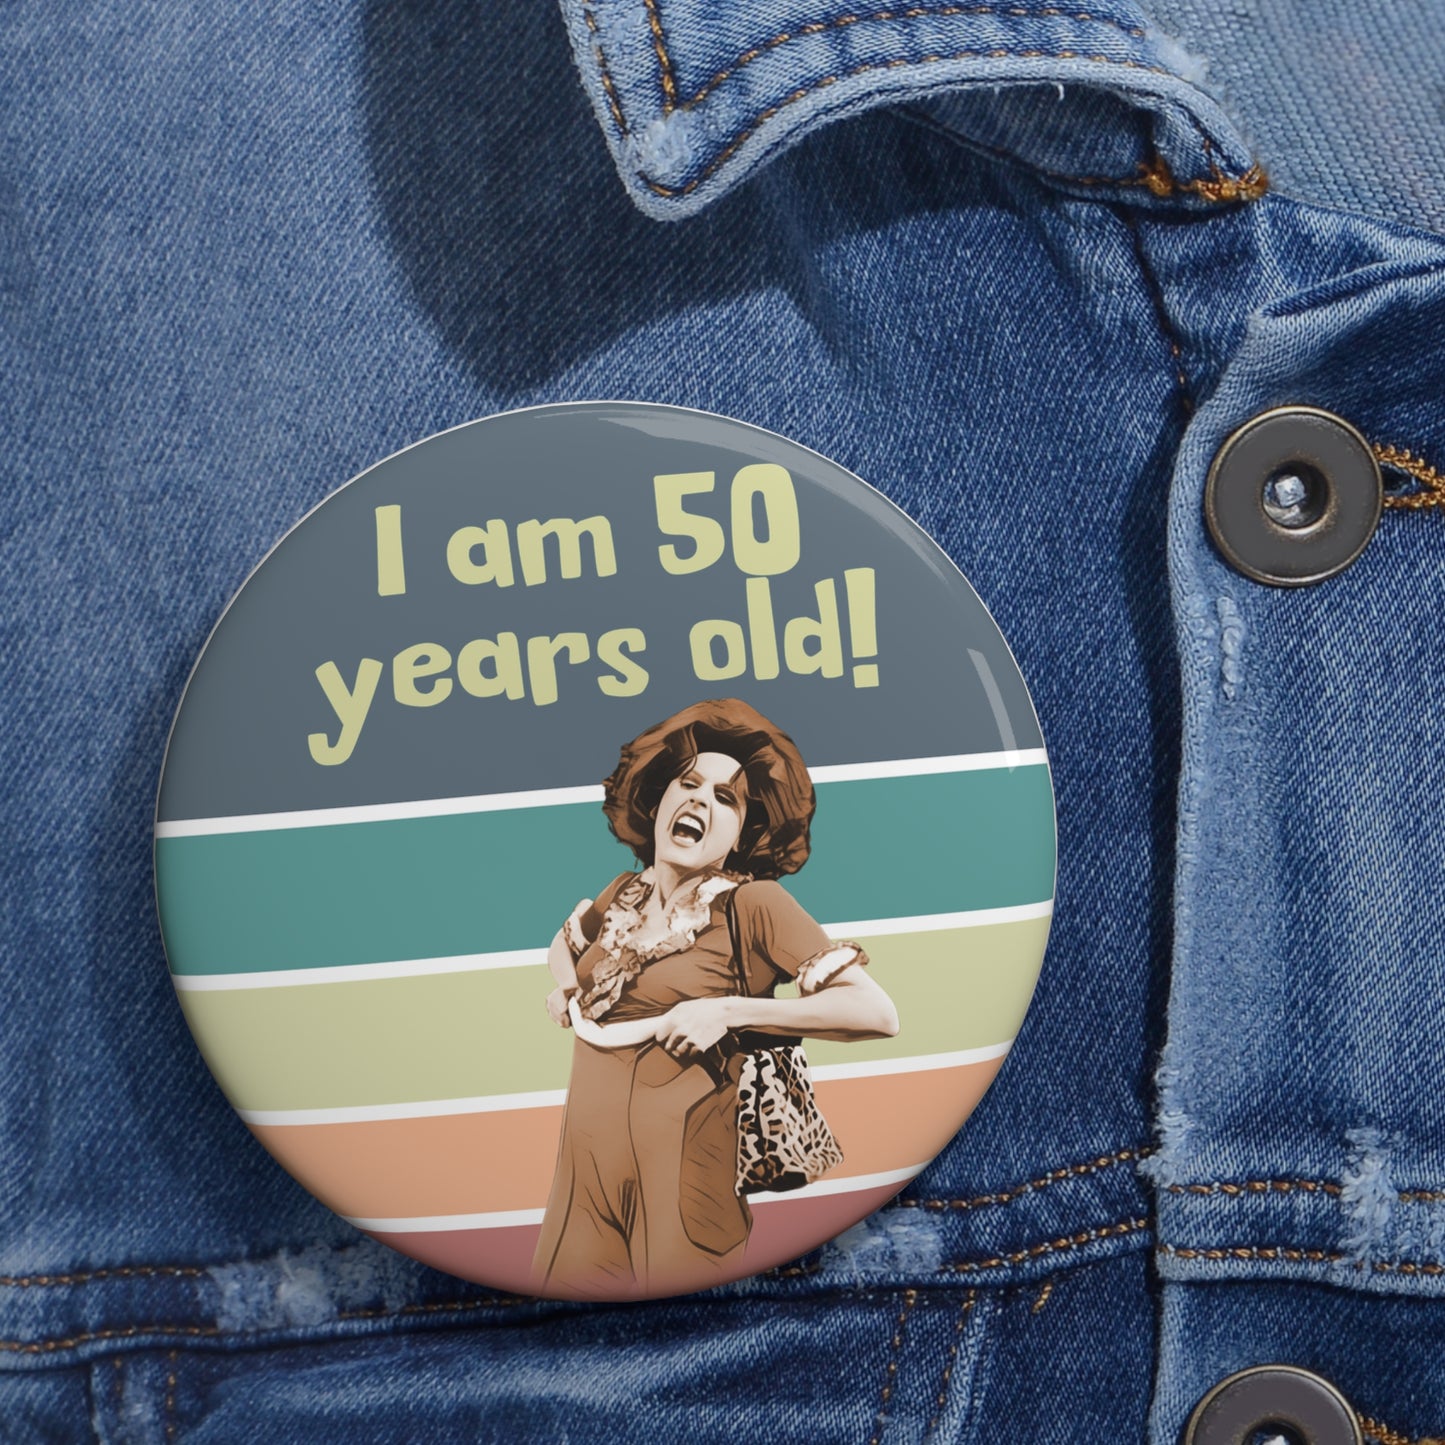 I'm 50, Sally O'Malley Button Pin, Molly Shannon, I like to Kick and Stretch